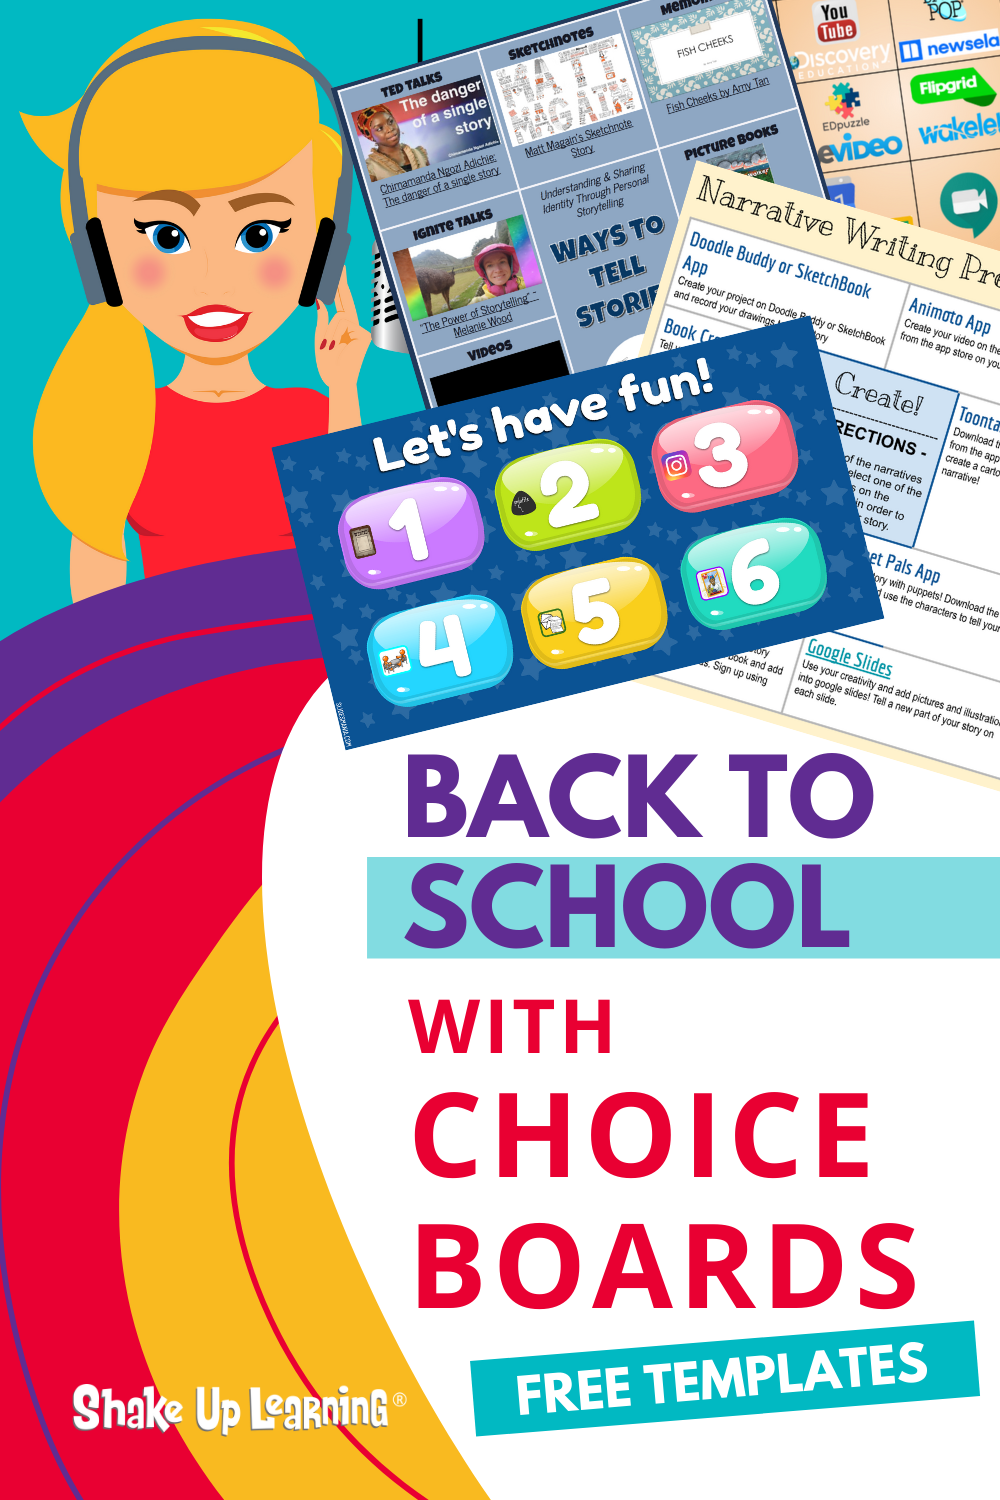 Back to School with Choice Boards – SULS0121